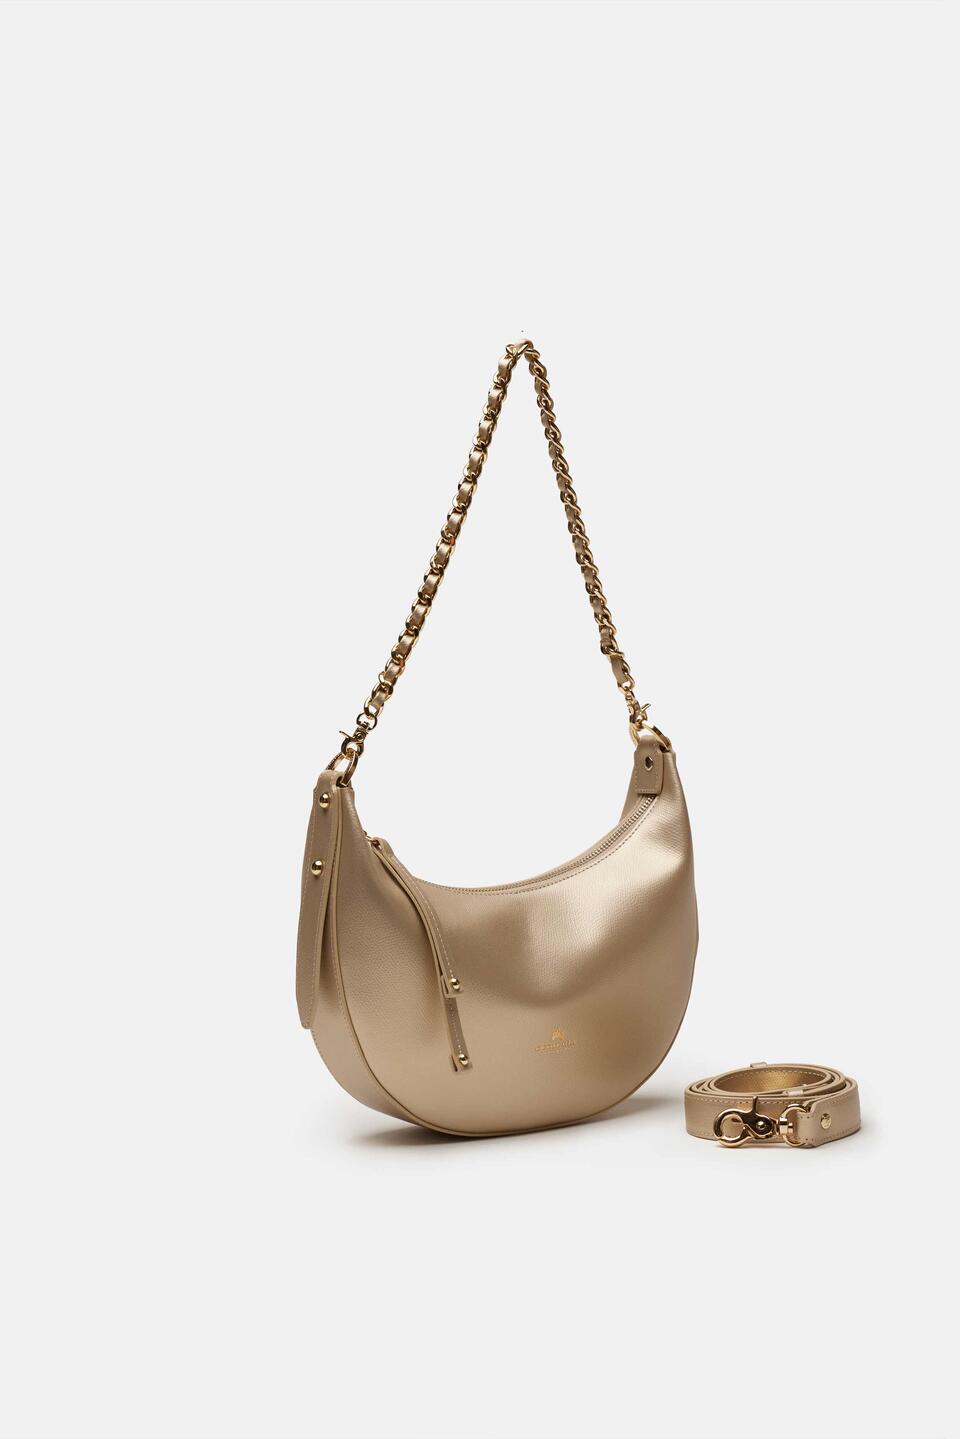 Small Hobo Gold  - Shoulder Bags - Women's Bags - Bags - Cuoieria Fiorentina